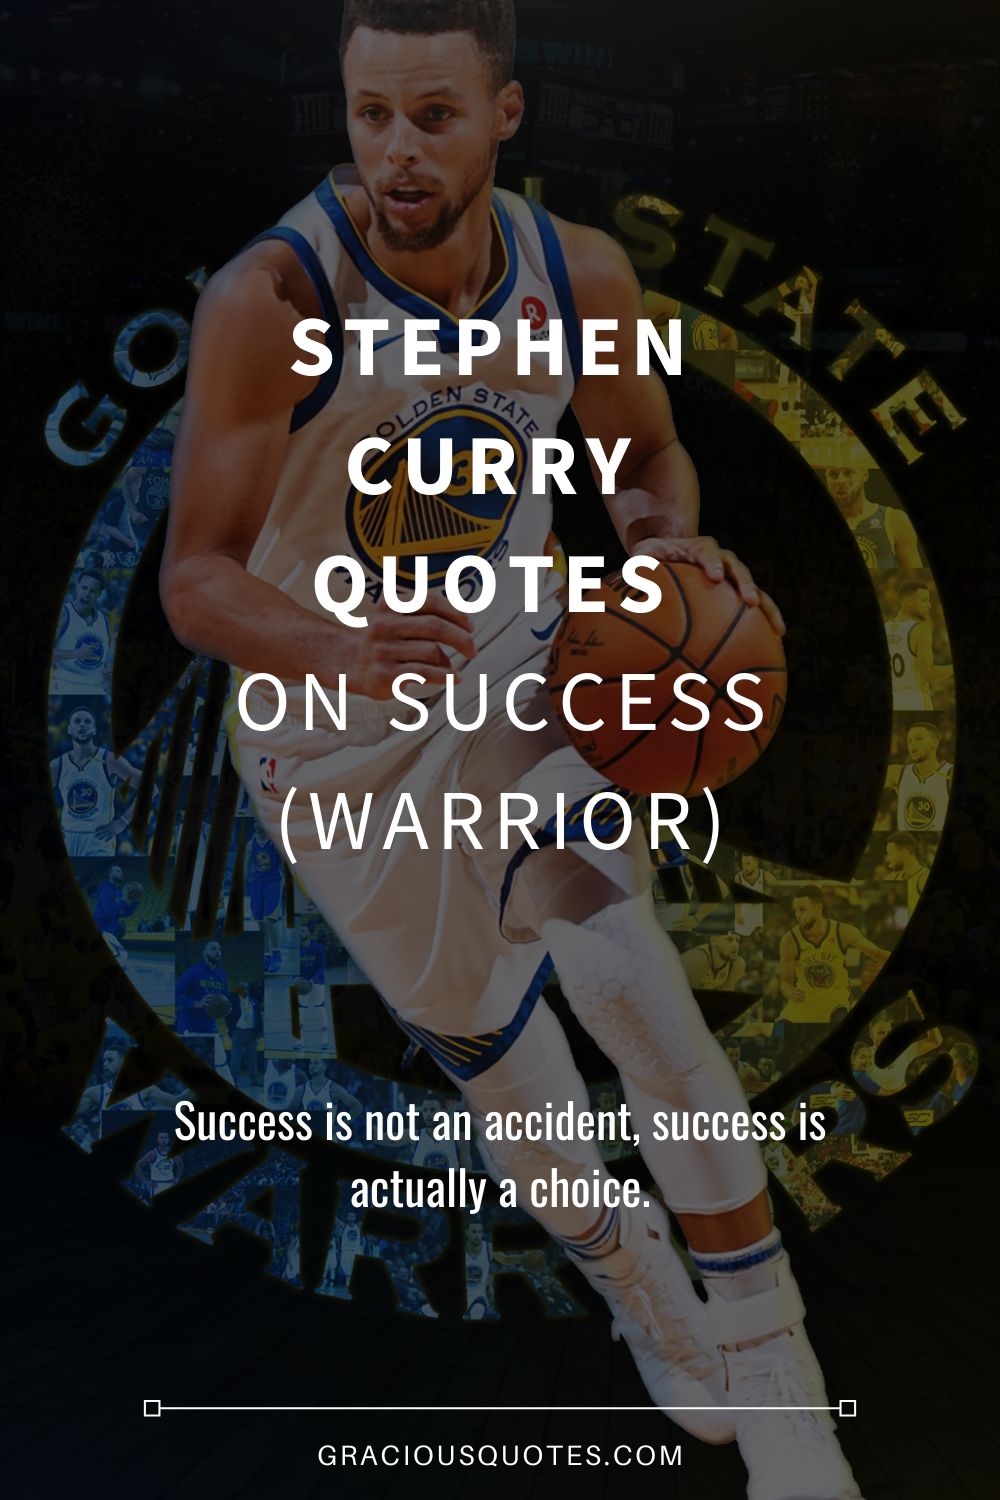 Stephen Curry Quotes on Success (WARRIOR) - Gracious Quotes